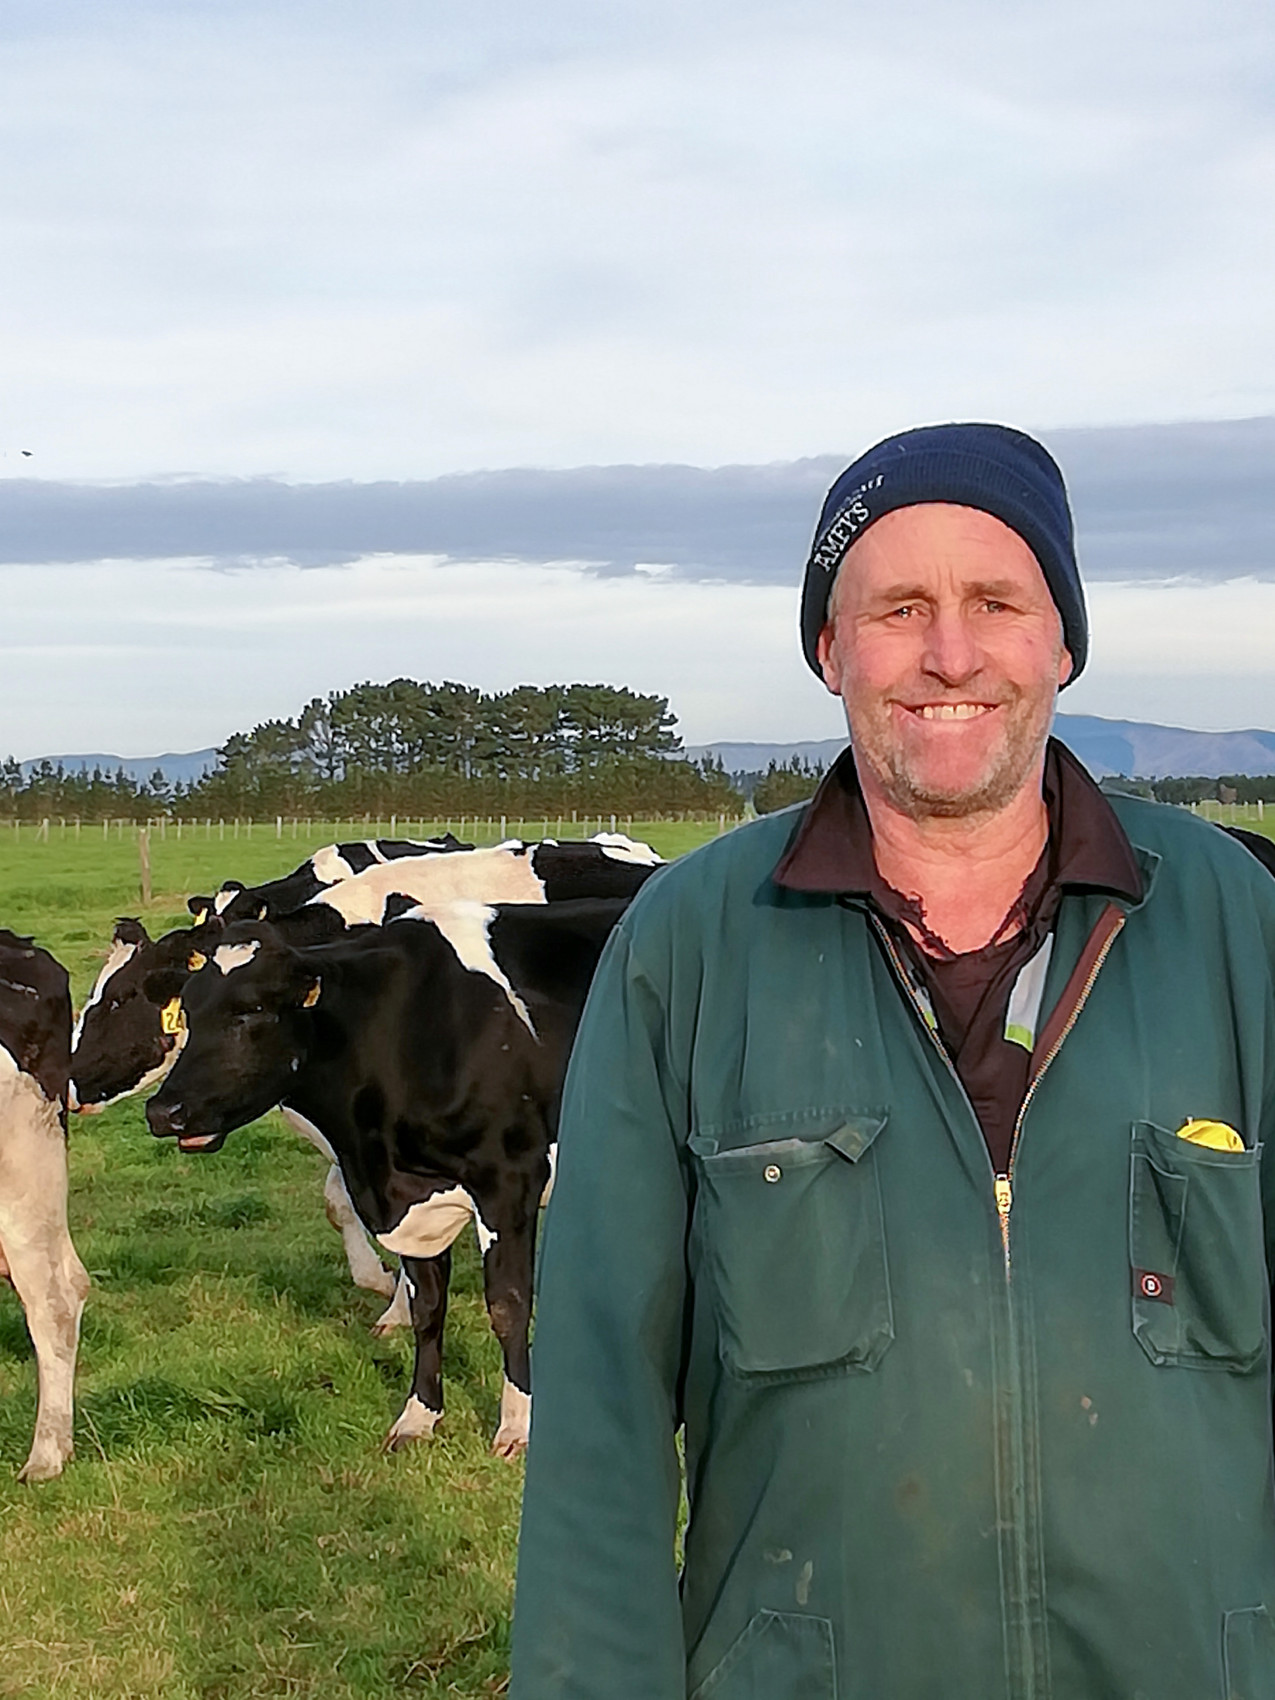 Grazing cows: it’s all about efficiency